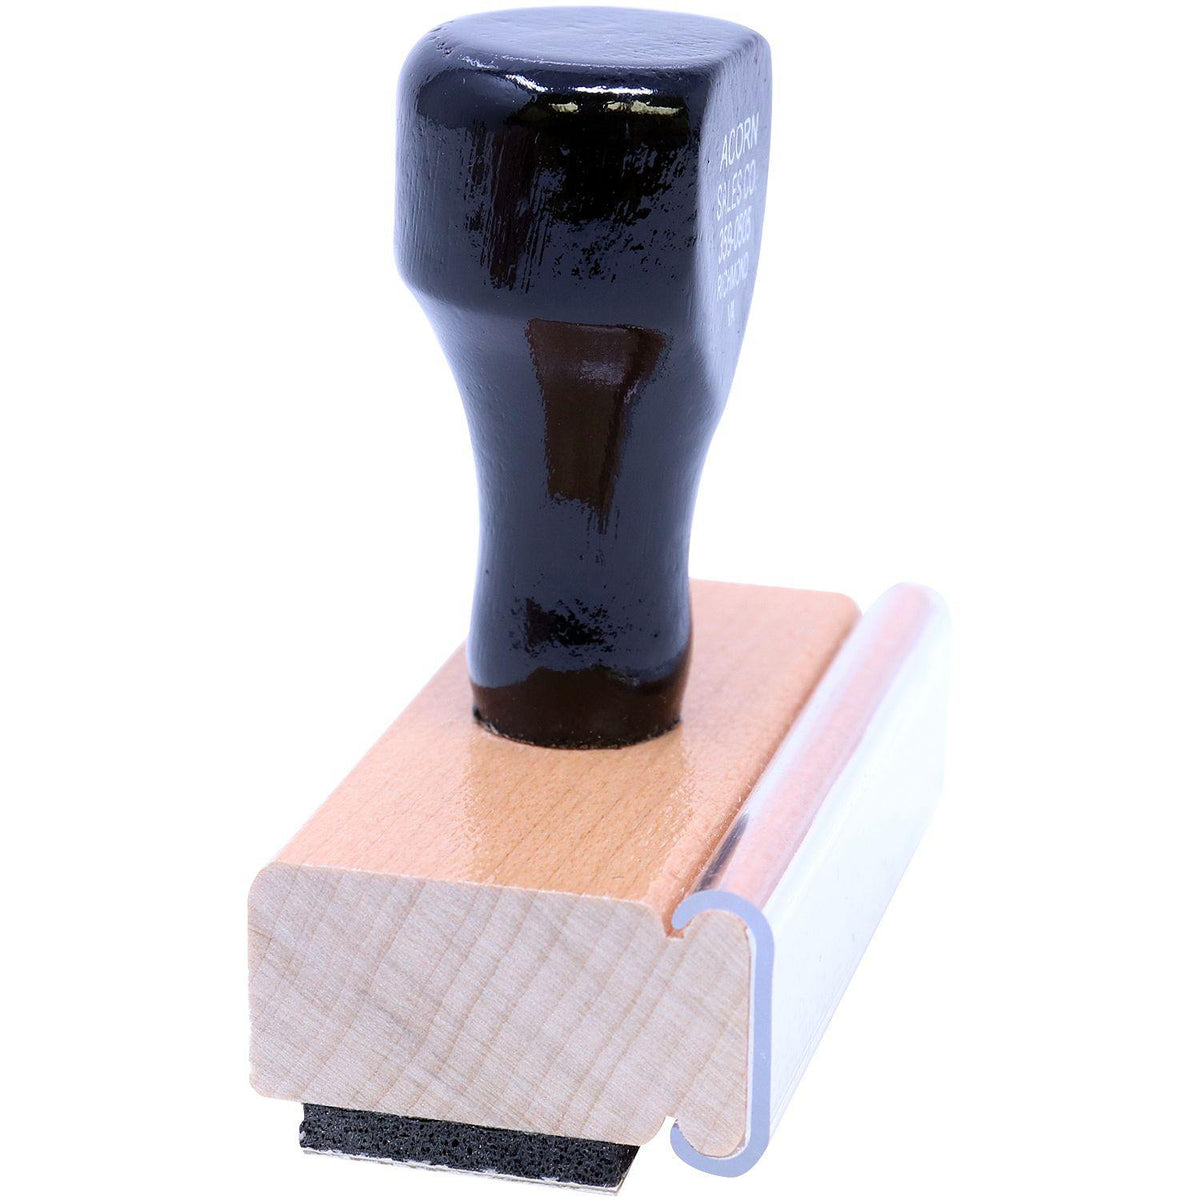 Side View of Large Ira Rubber Stamp at an Angle